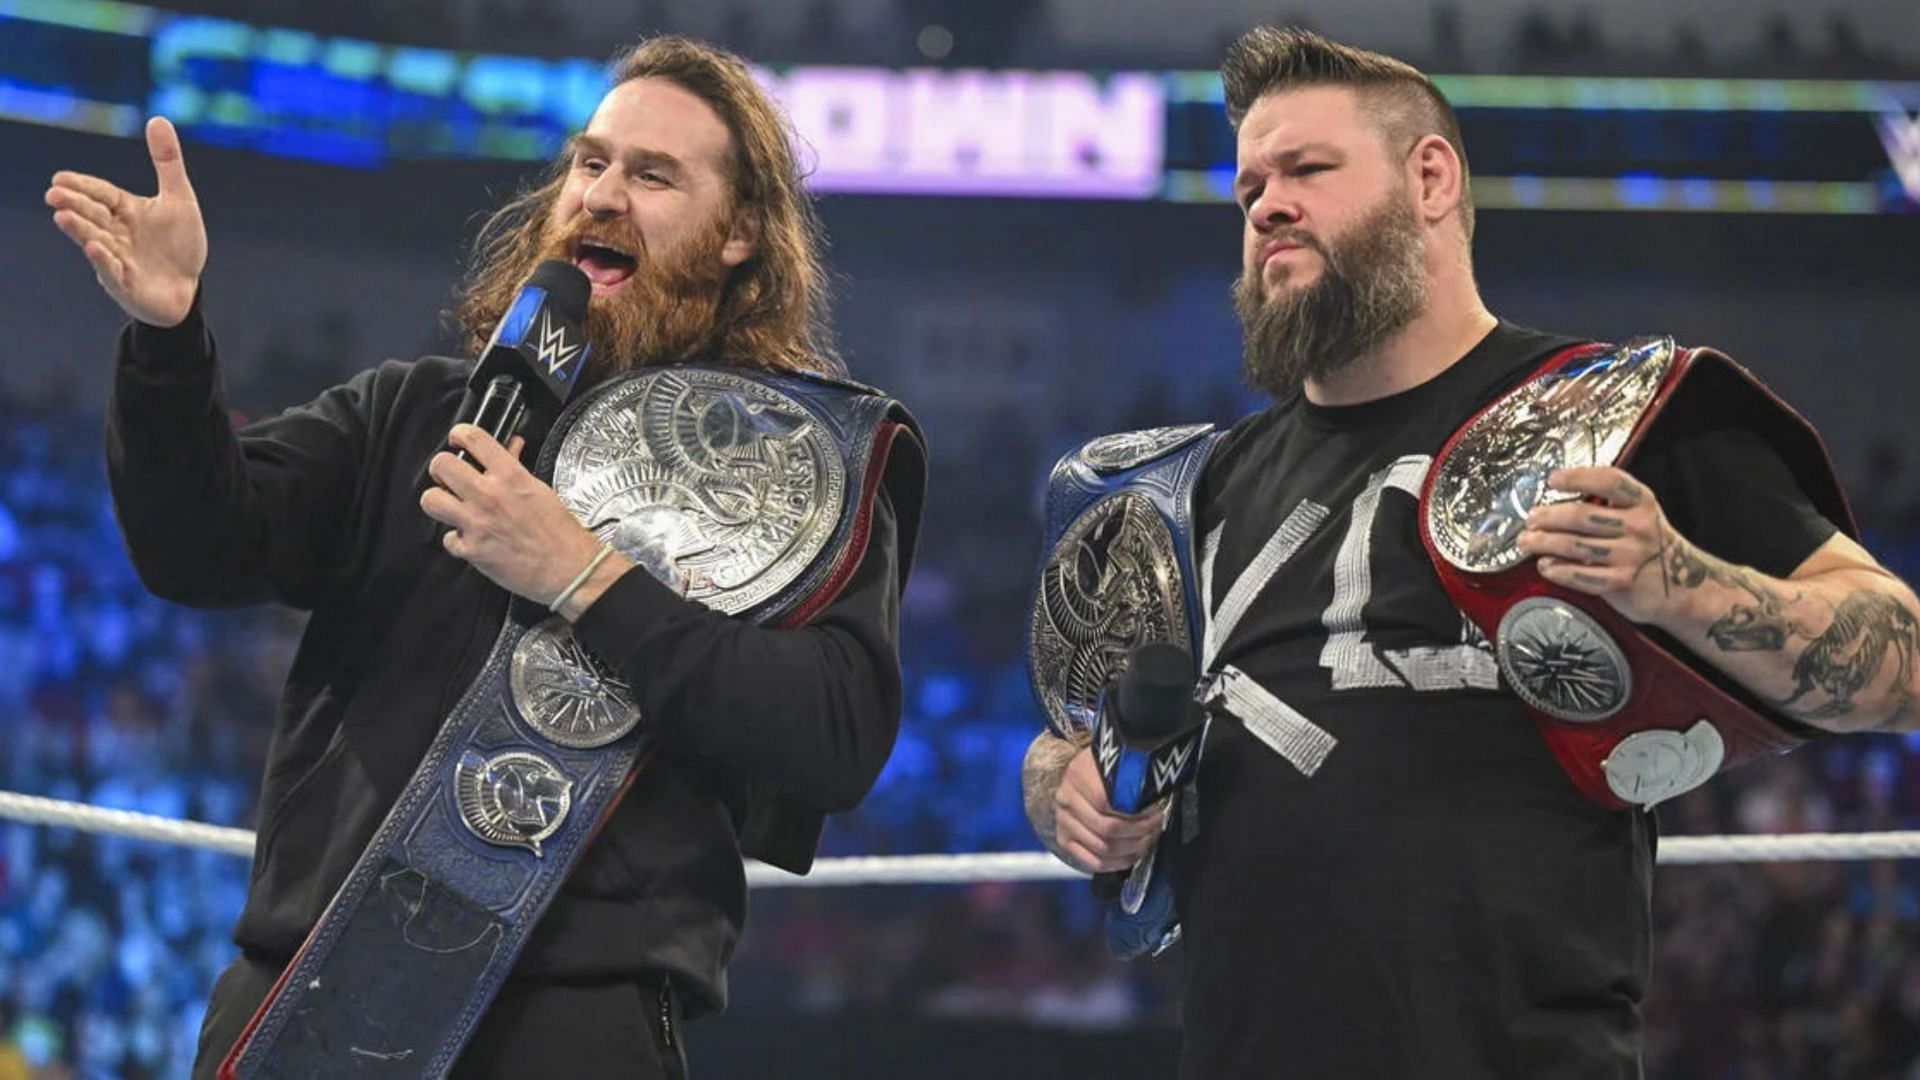 Kevin Owens is currently one-half of the Undisputed WWE Tag Team Champions